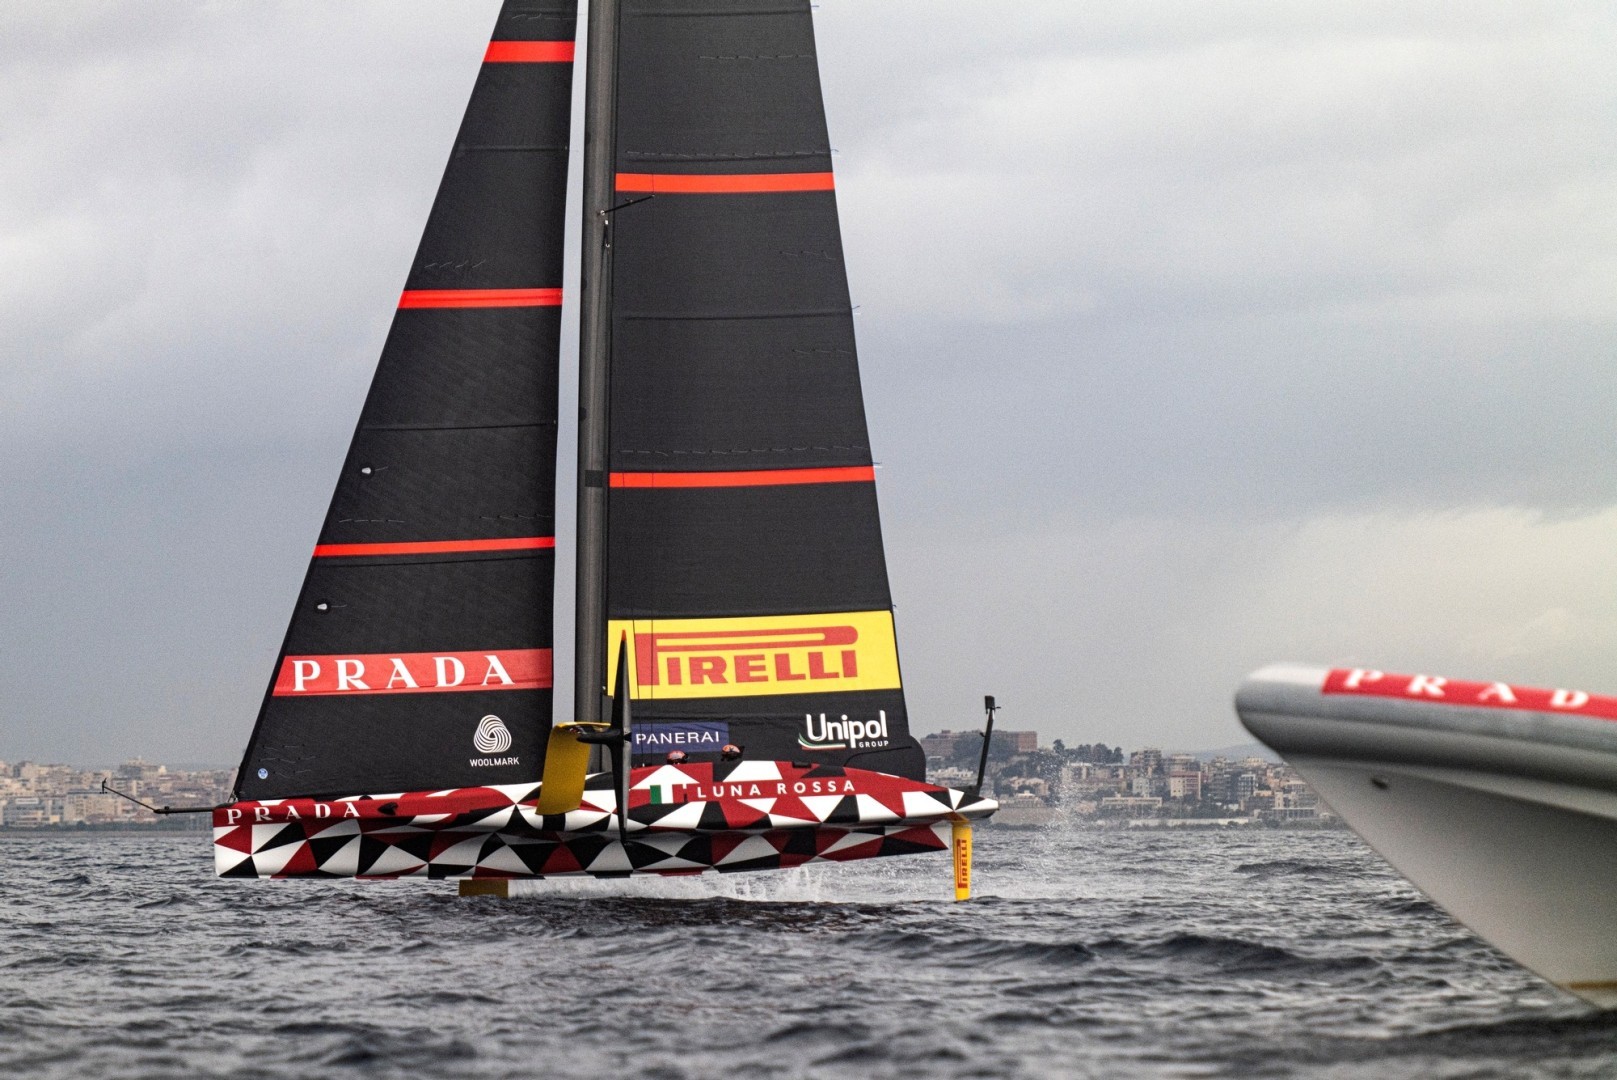 Luna Rossa: We have achieved nearly all the goals